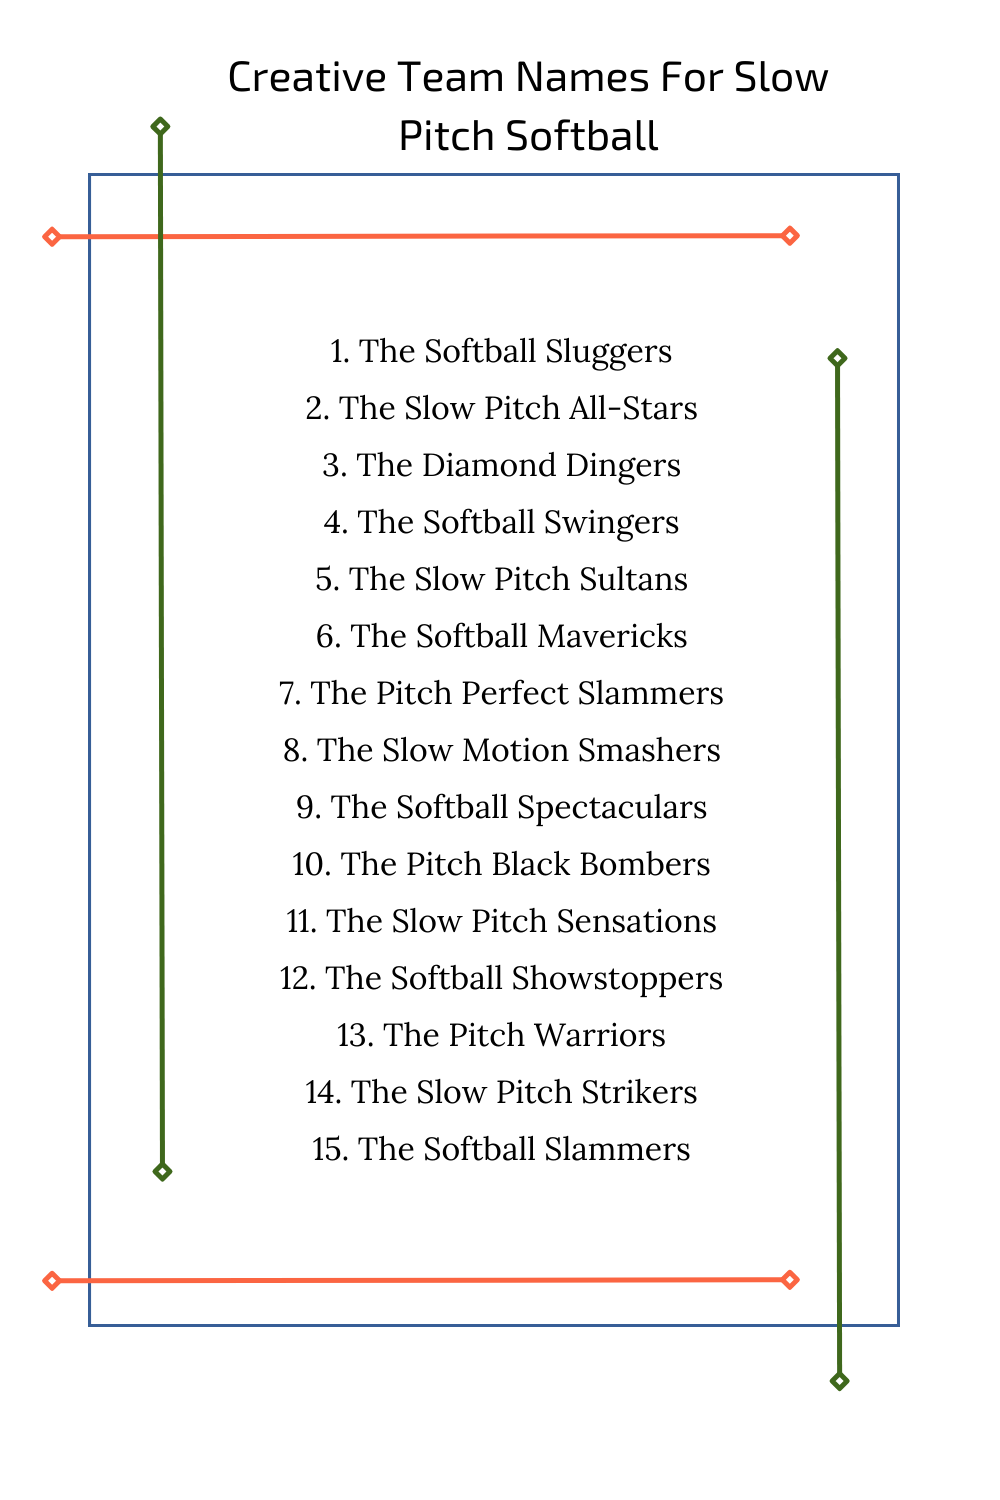 Creative Team Names For Slow Pitch Softball